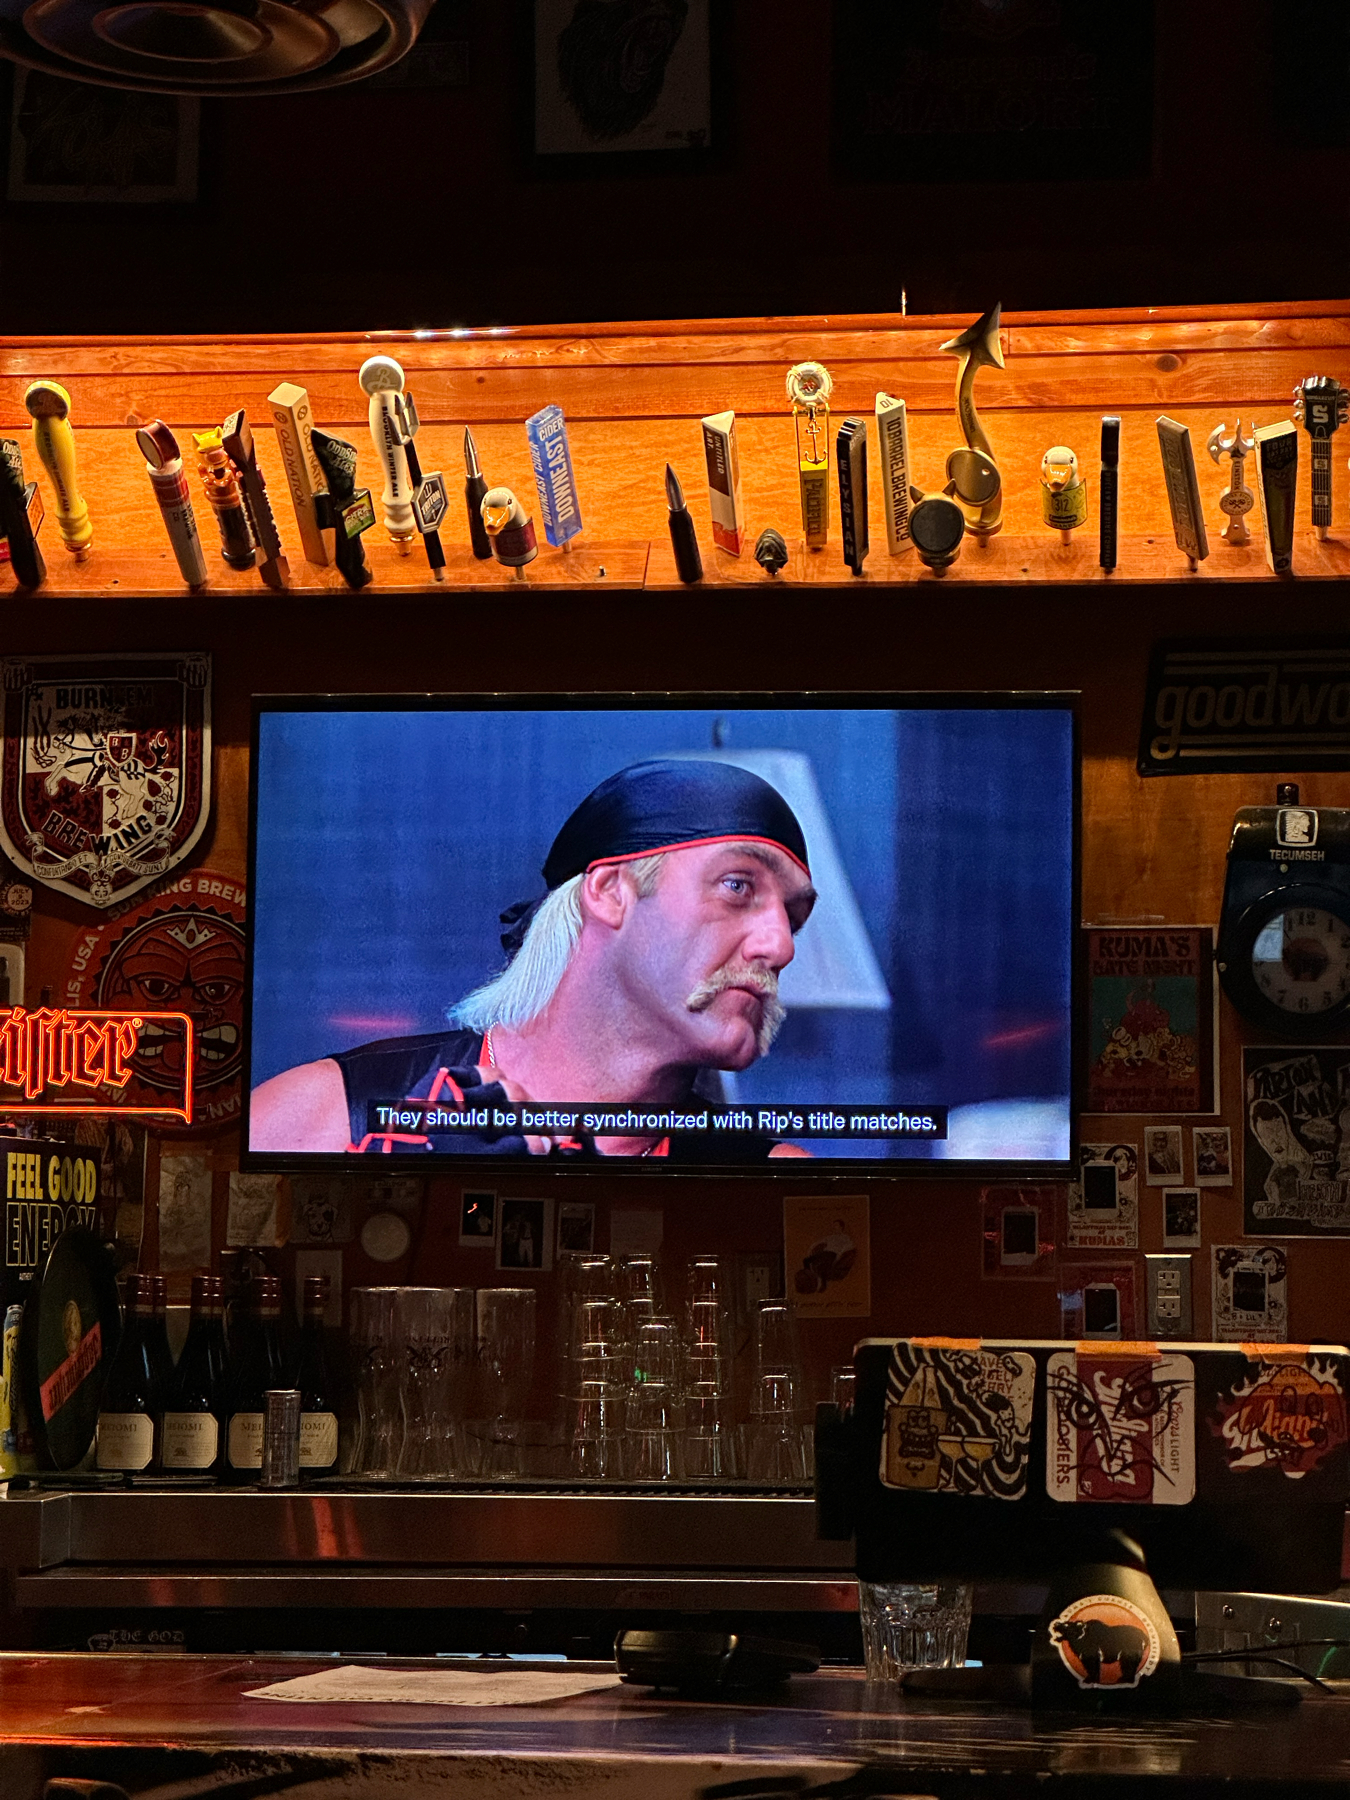 A television screen mounted in a bar showing a man with a bandana and mustache. Below the TV is a variety of draft beer taps and glasses on the counter. There’s a subtitle on the screen, and various posters and signs decorate the walls